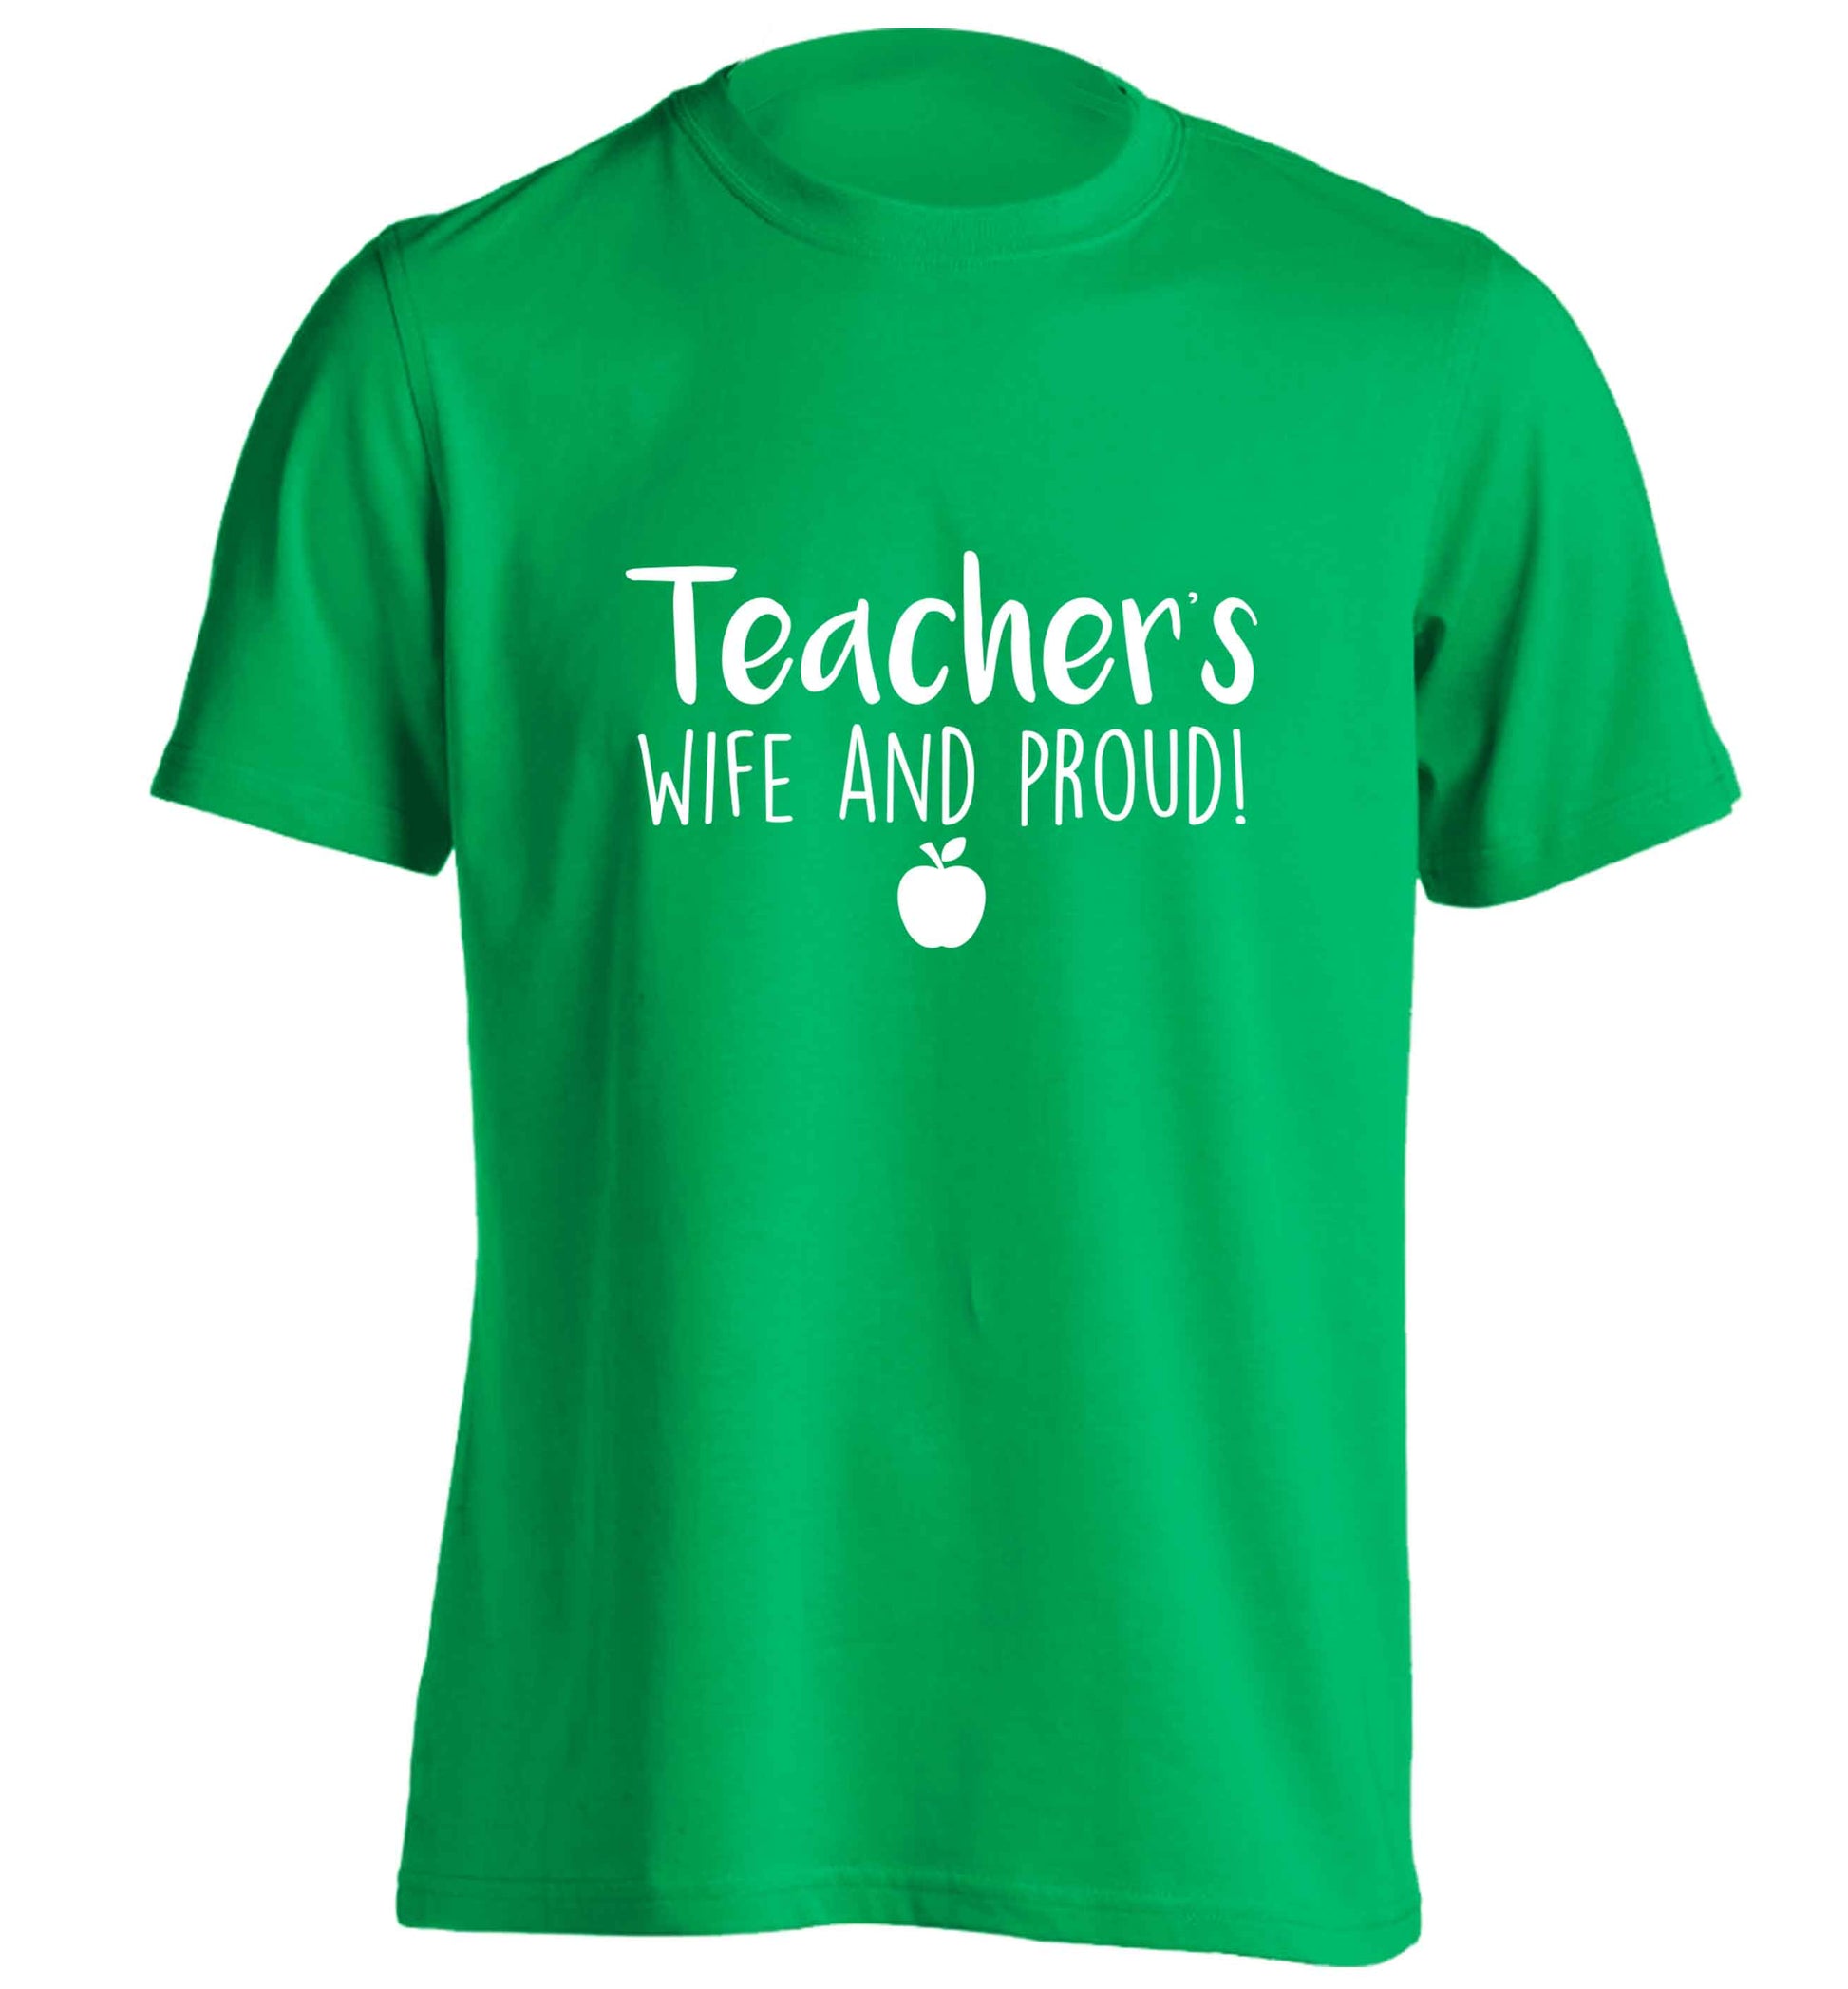 Teachers wife and proud adults unisex green Tshirt 2XL